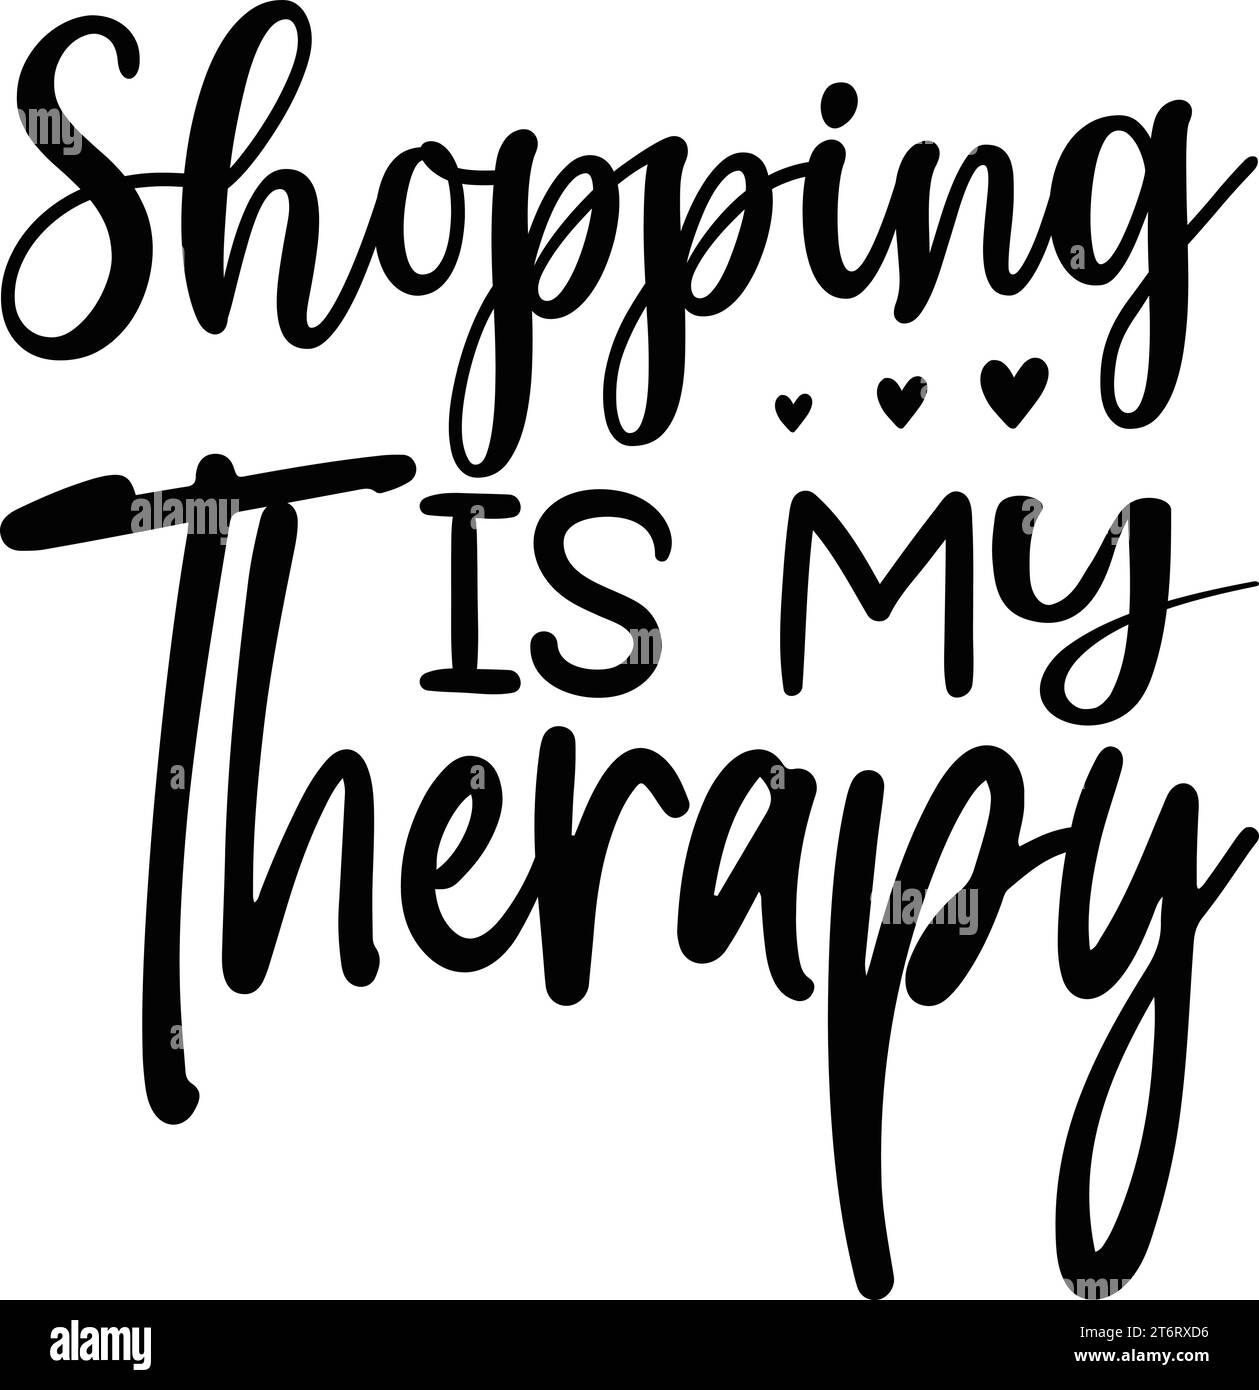 Shopping Is My Therapy Stock Vector